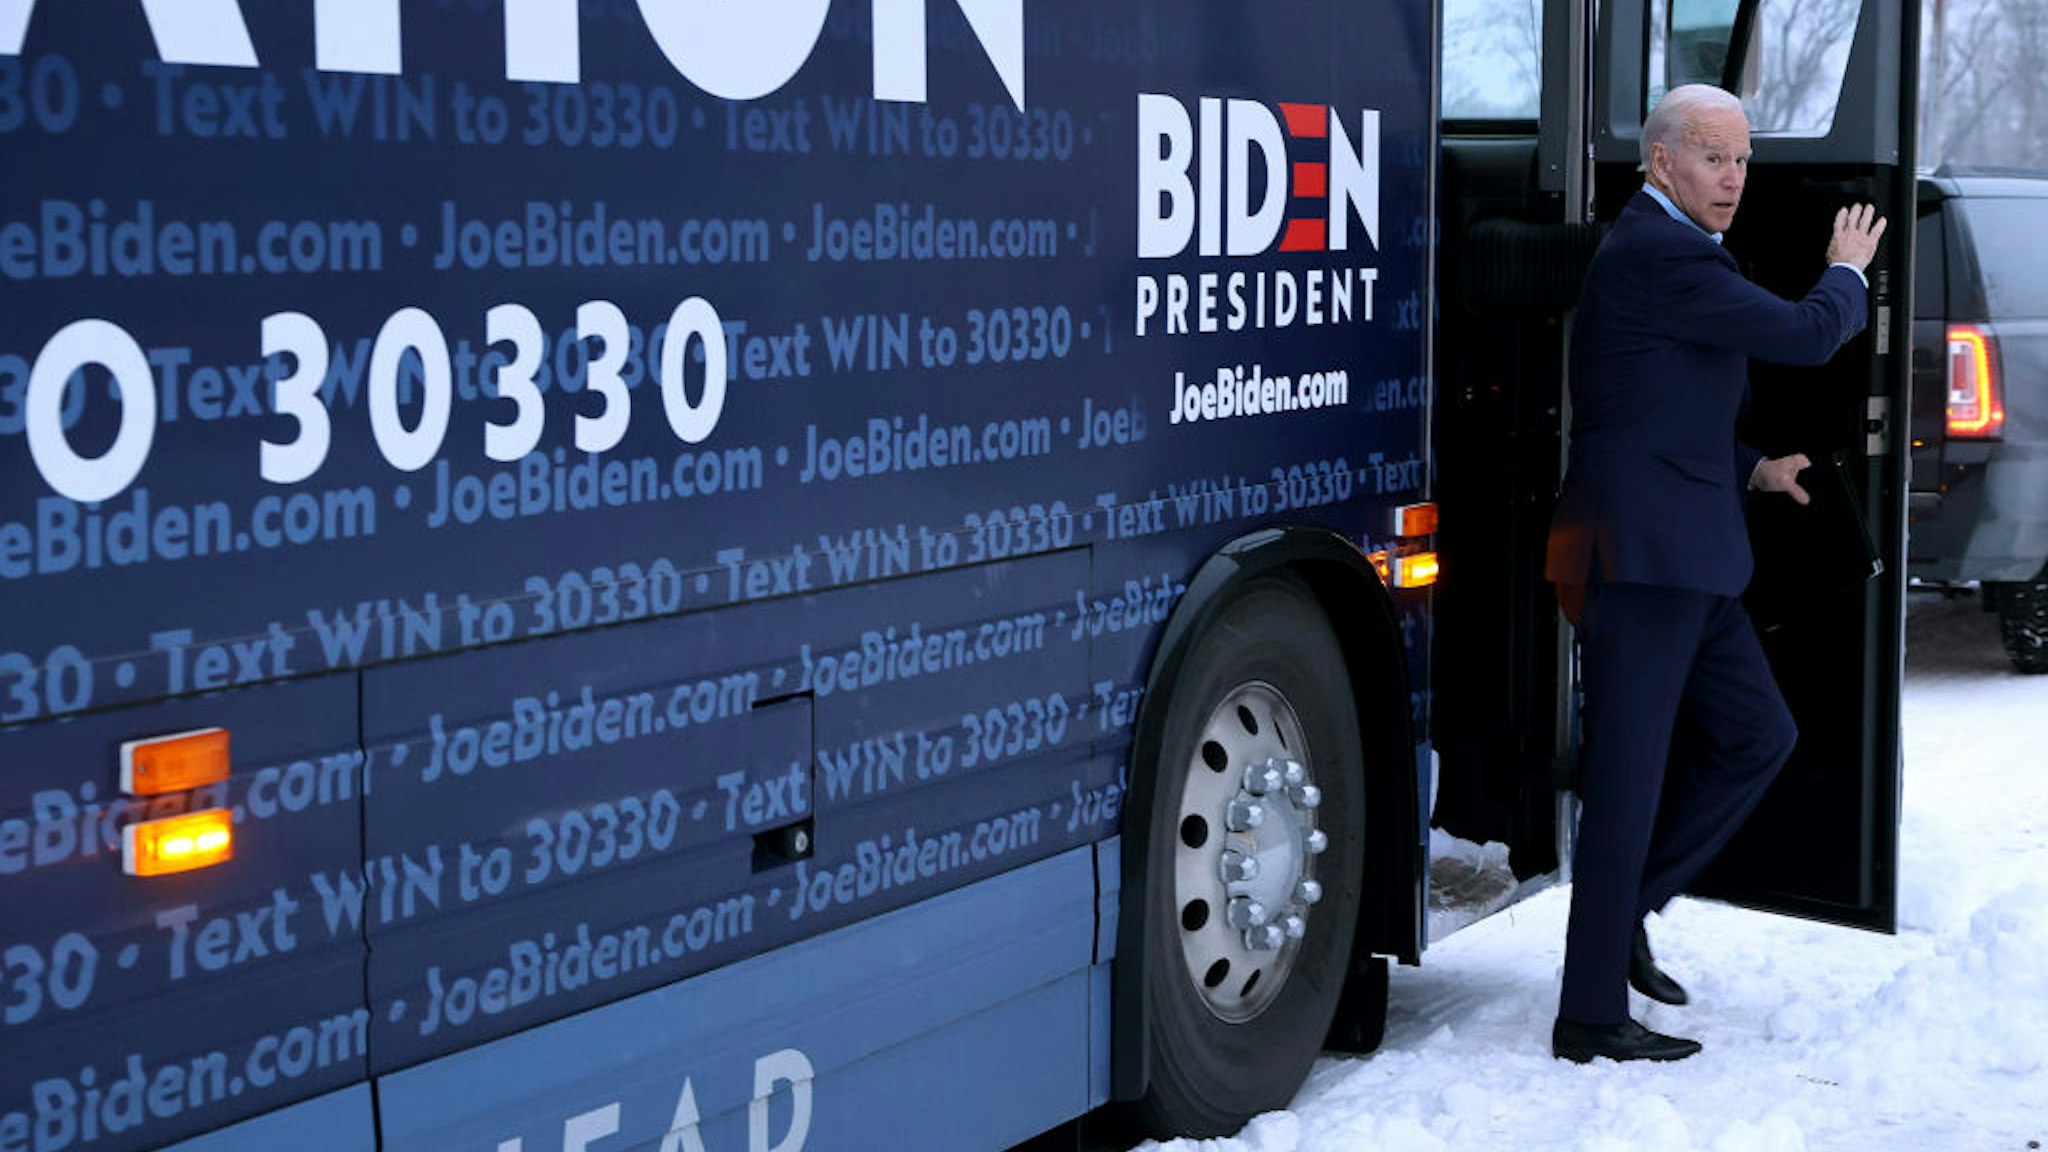 MARSHALLTOWN, IOWA - JANUARY 26: Democratic presidential candidate former Vice President Joe Biden steps off his campaign Bus before an event at the Central Iowa Fairgrounds January 26, 2020 in Marshalltown, Iowa. In a what appears to be a neck-and-neck race, Biden is ahead of rival candidate Sen. Bernie Sanders (I-VT) by 6 points in a USA Today/Suffolk University poll but is running behind Sanders by 8 points according to a New York Times/Siena College poll, both polls of likely Iowa caucus-goers conducted at about the same time. (Photo by